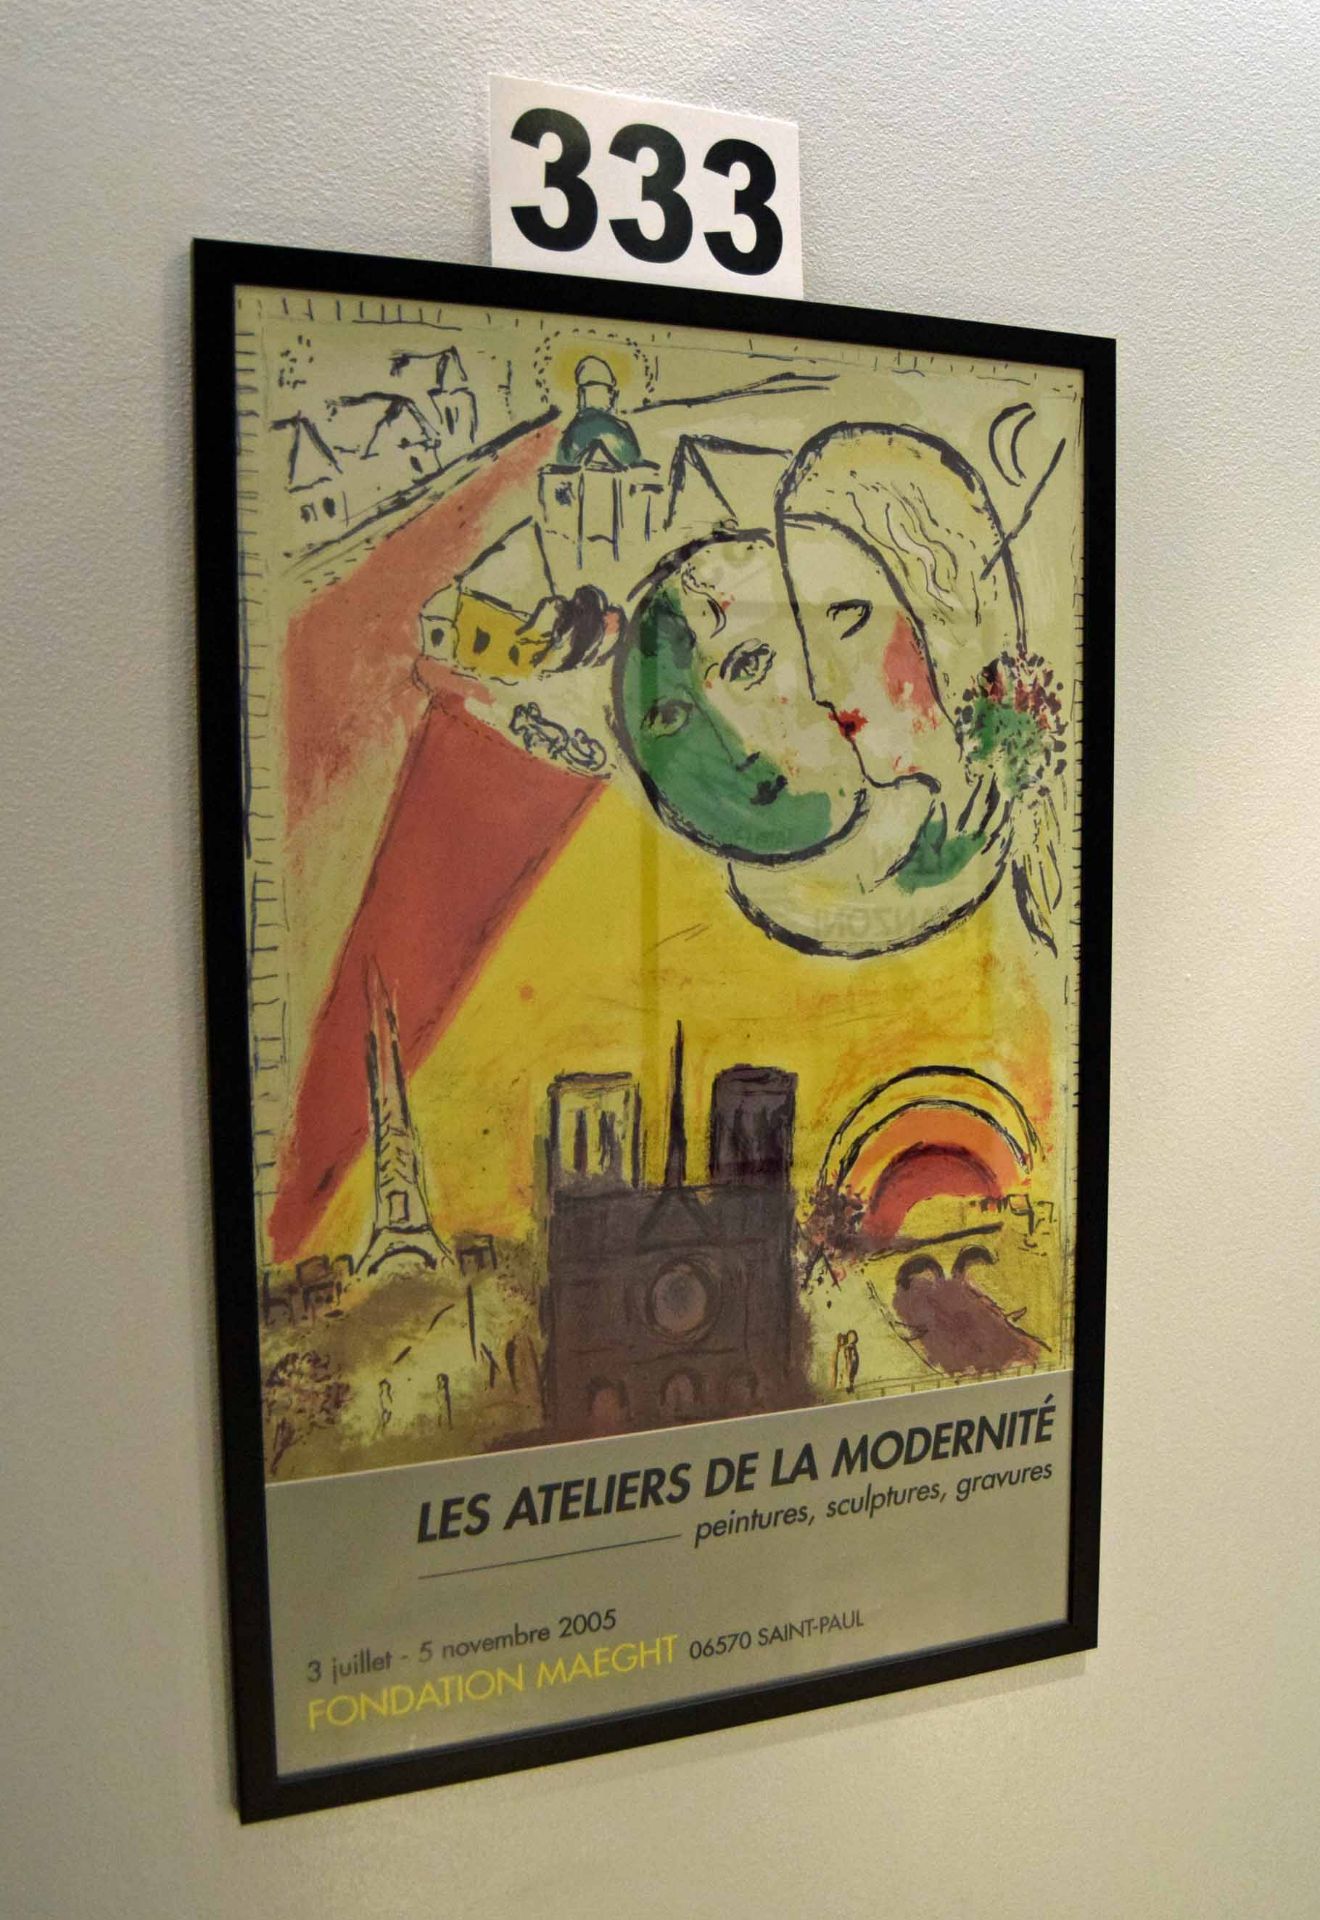 A Wall mounted Framed and Glazed Poster advertising 'Les Ateliers de la Modernite' in Paris France